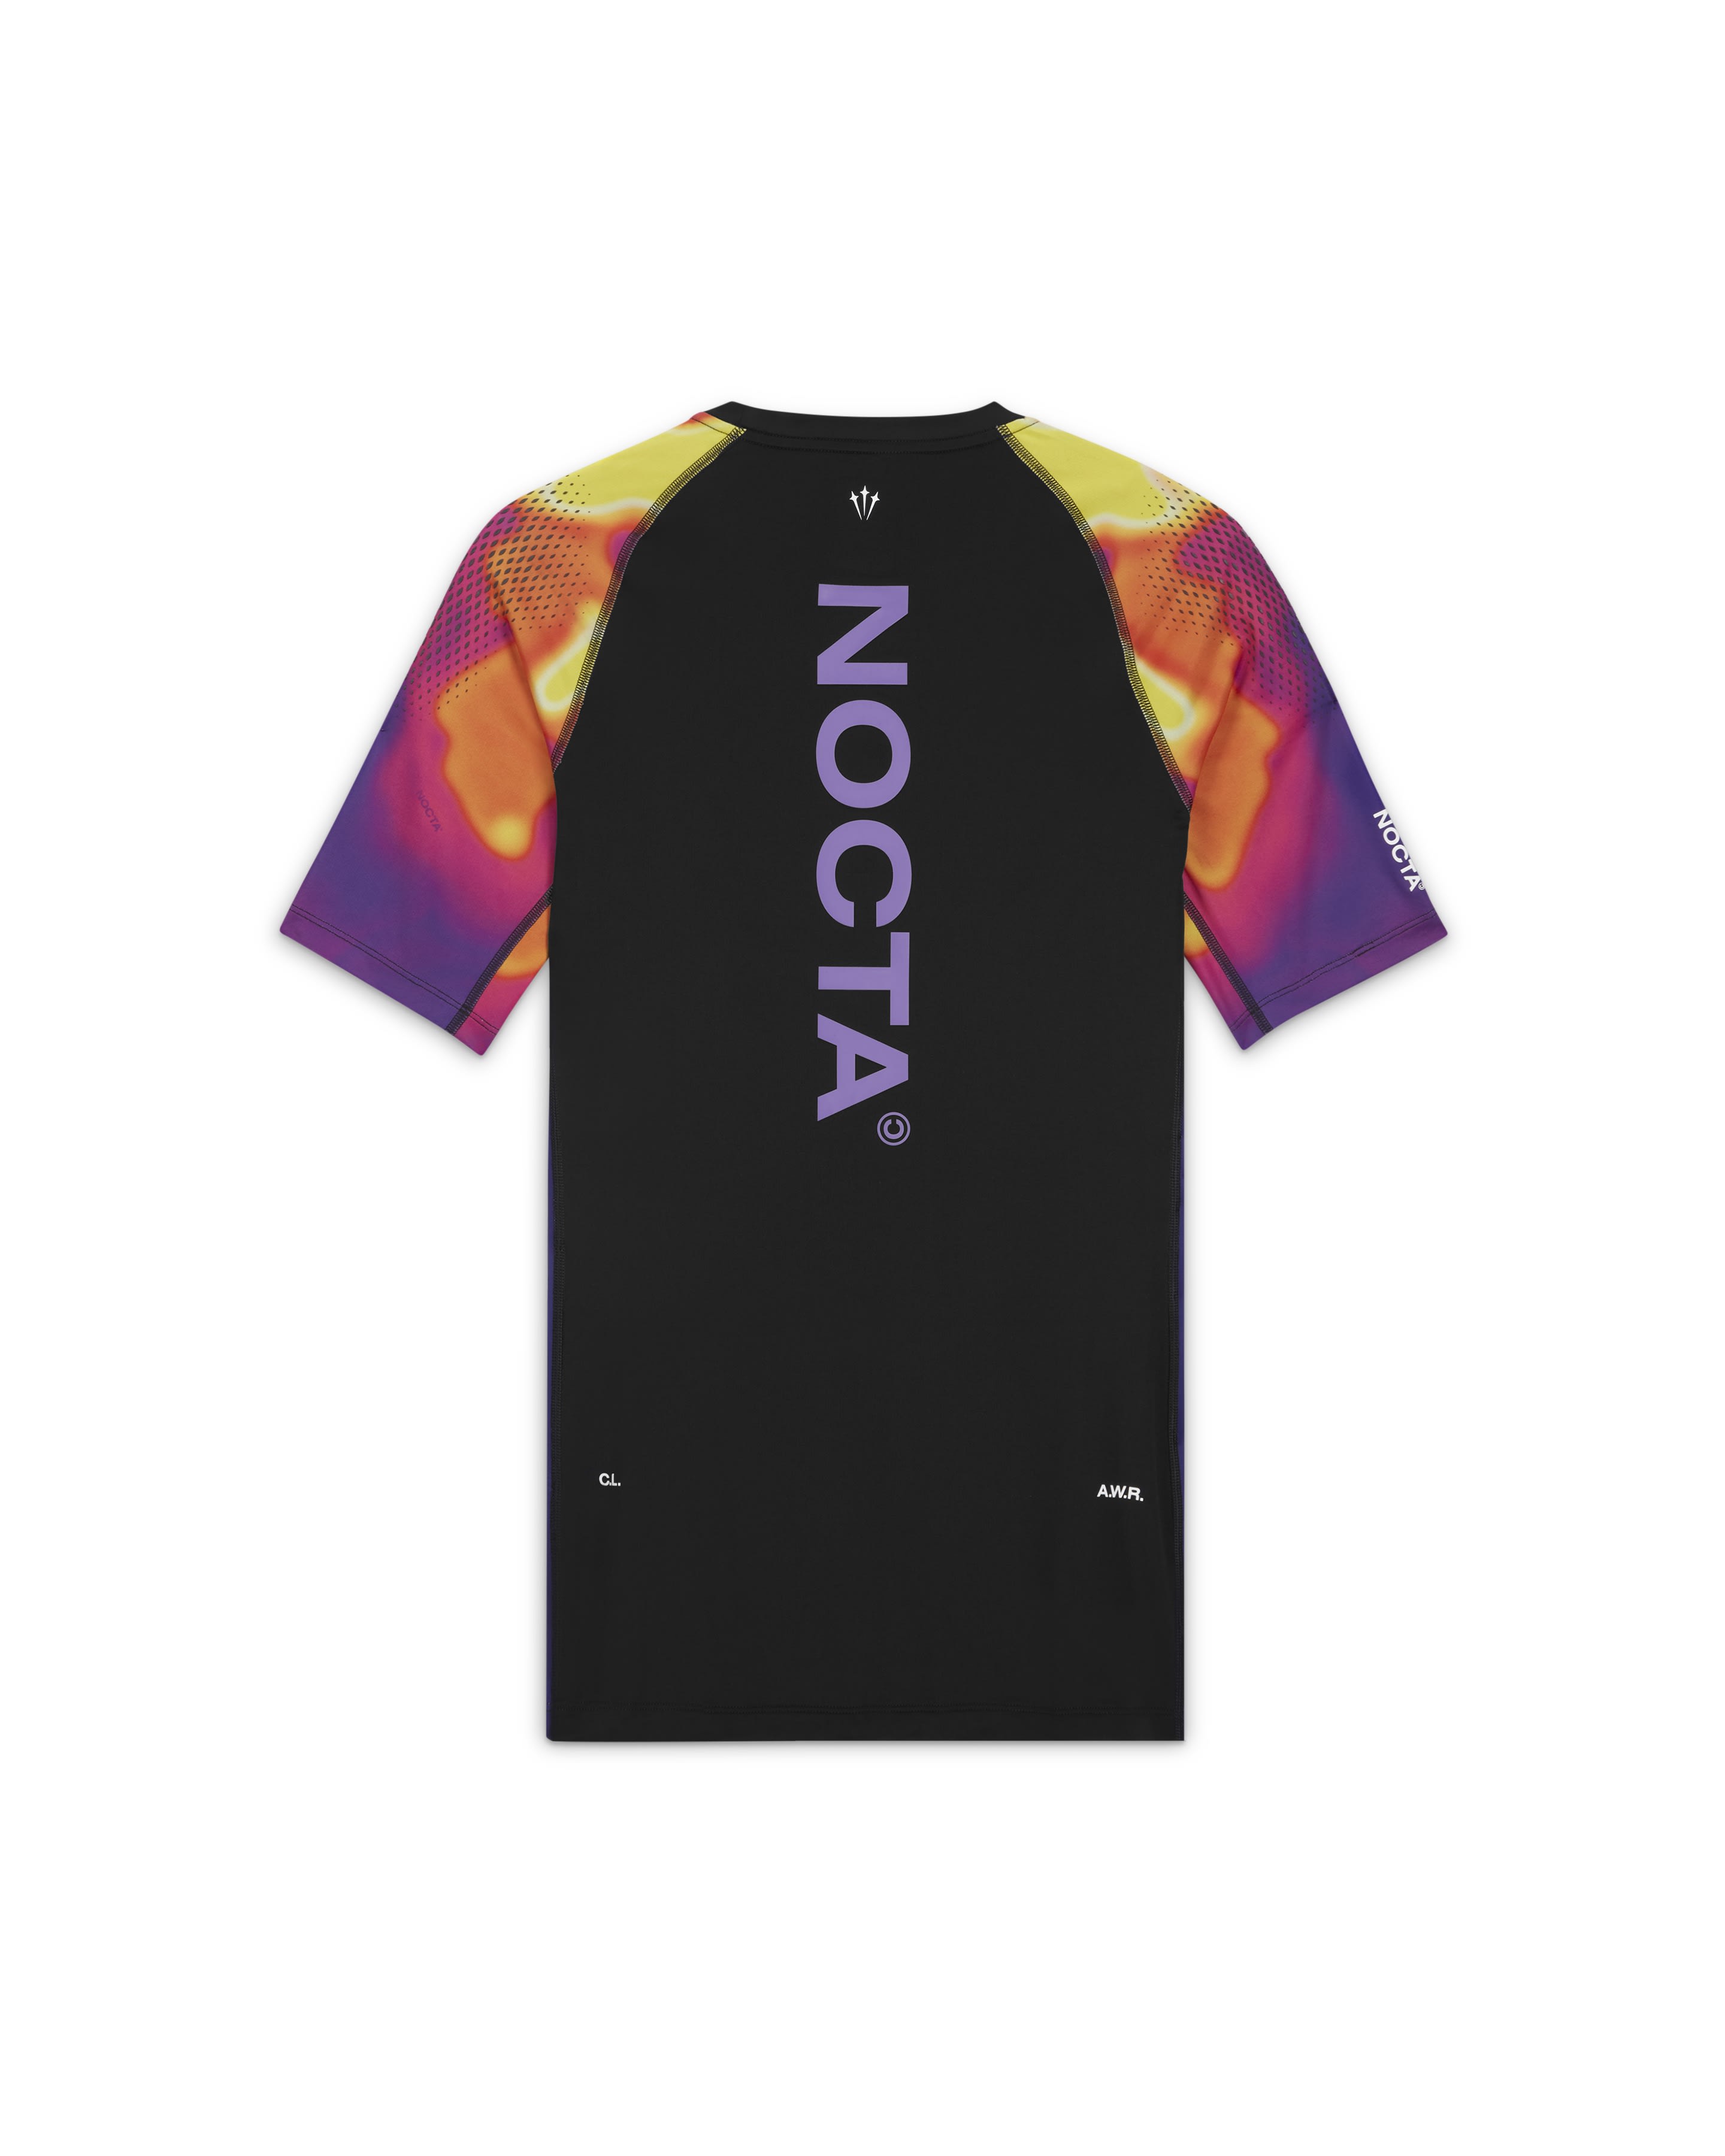 New NOCTA Basketball Capsule Collection From Drake On The Way